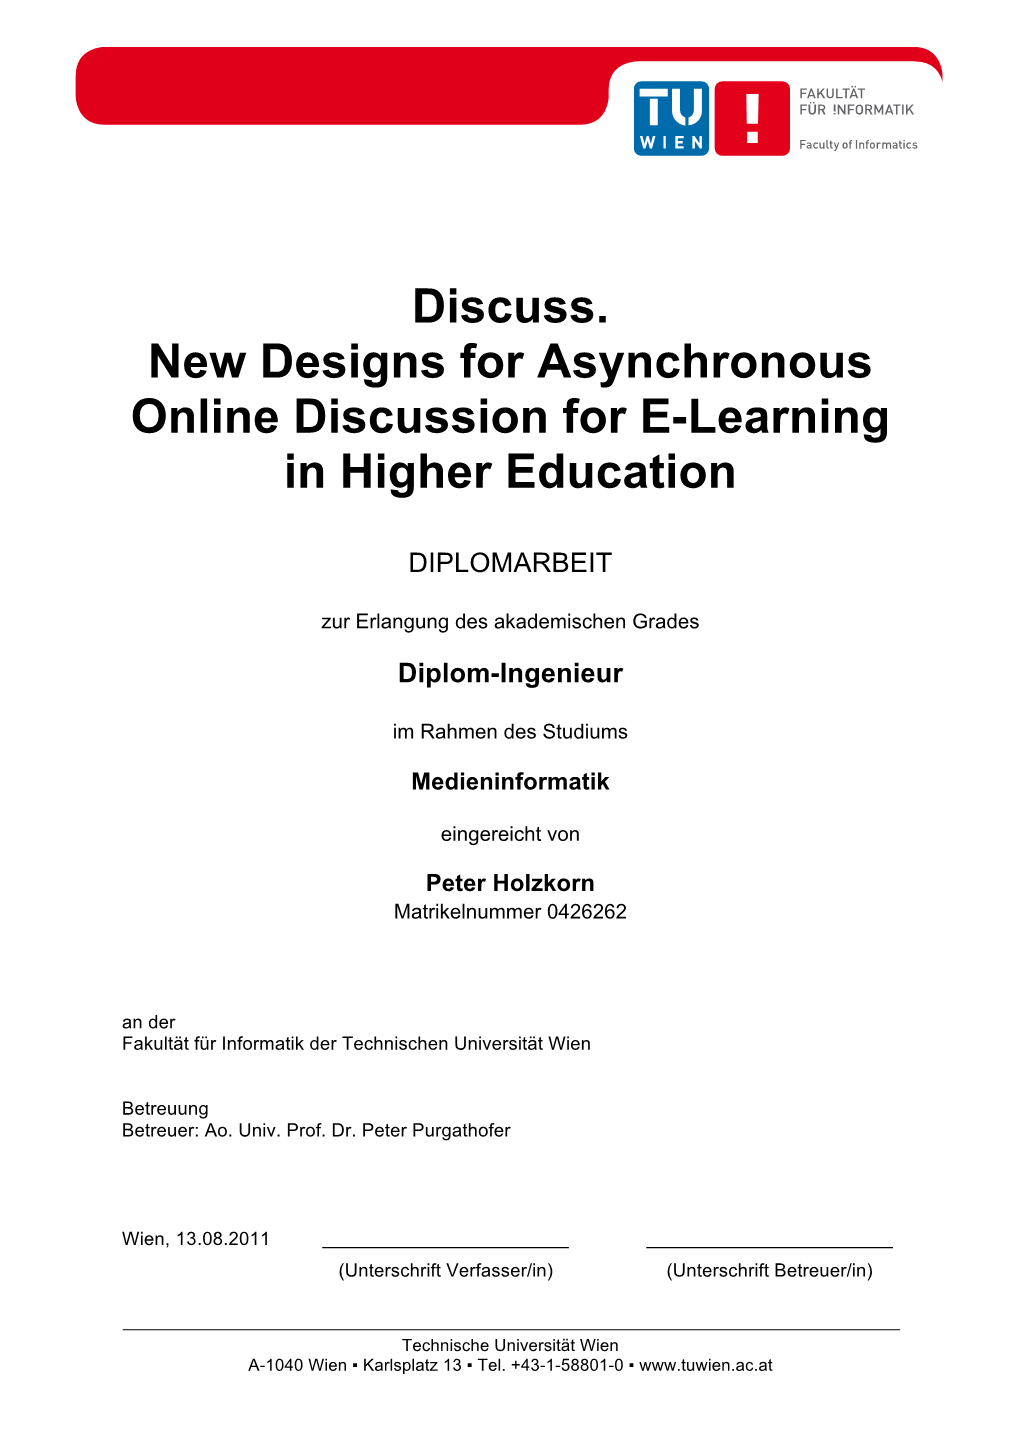 New Designs for Asynchronous Online Discussion for E-Learning in Higher Education